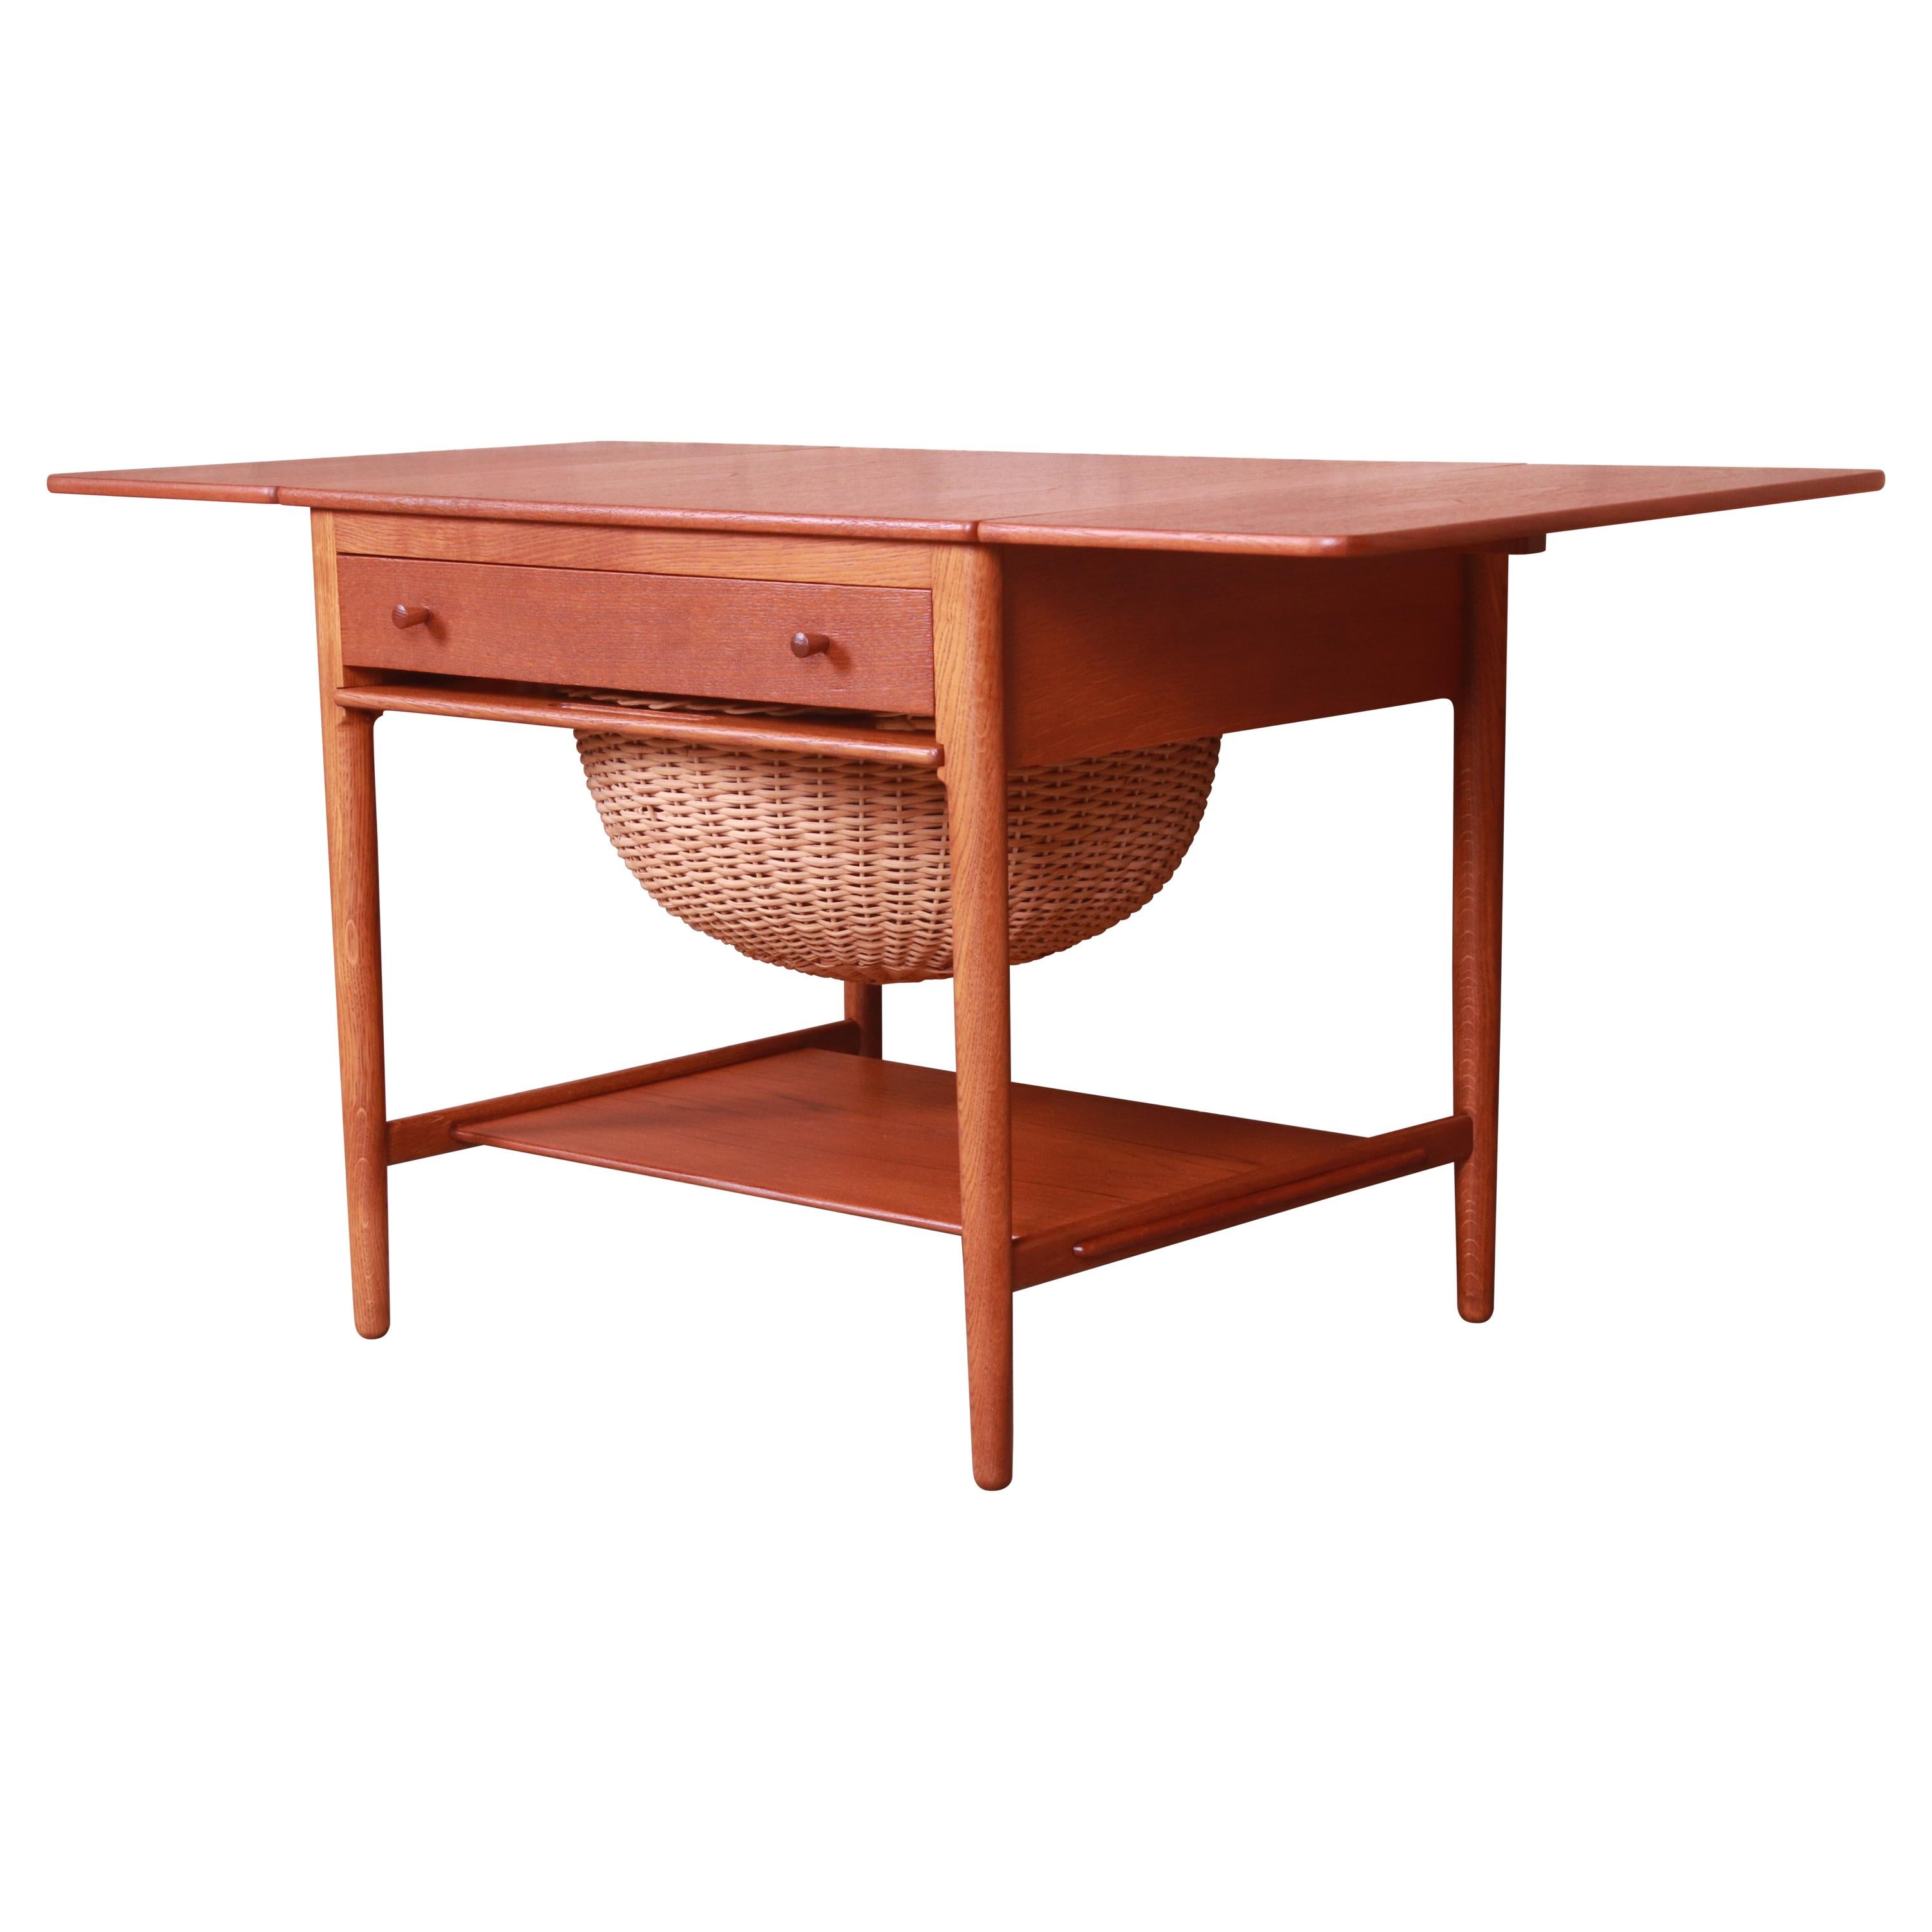 Hans J. Wegner for Andreas Tuck Teak and Oak Sewing Table, Newly Restored